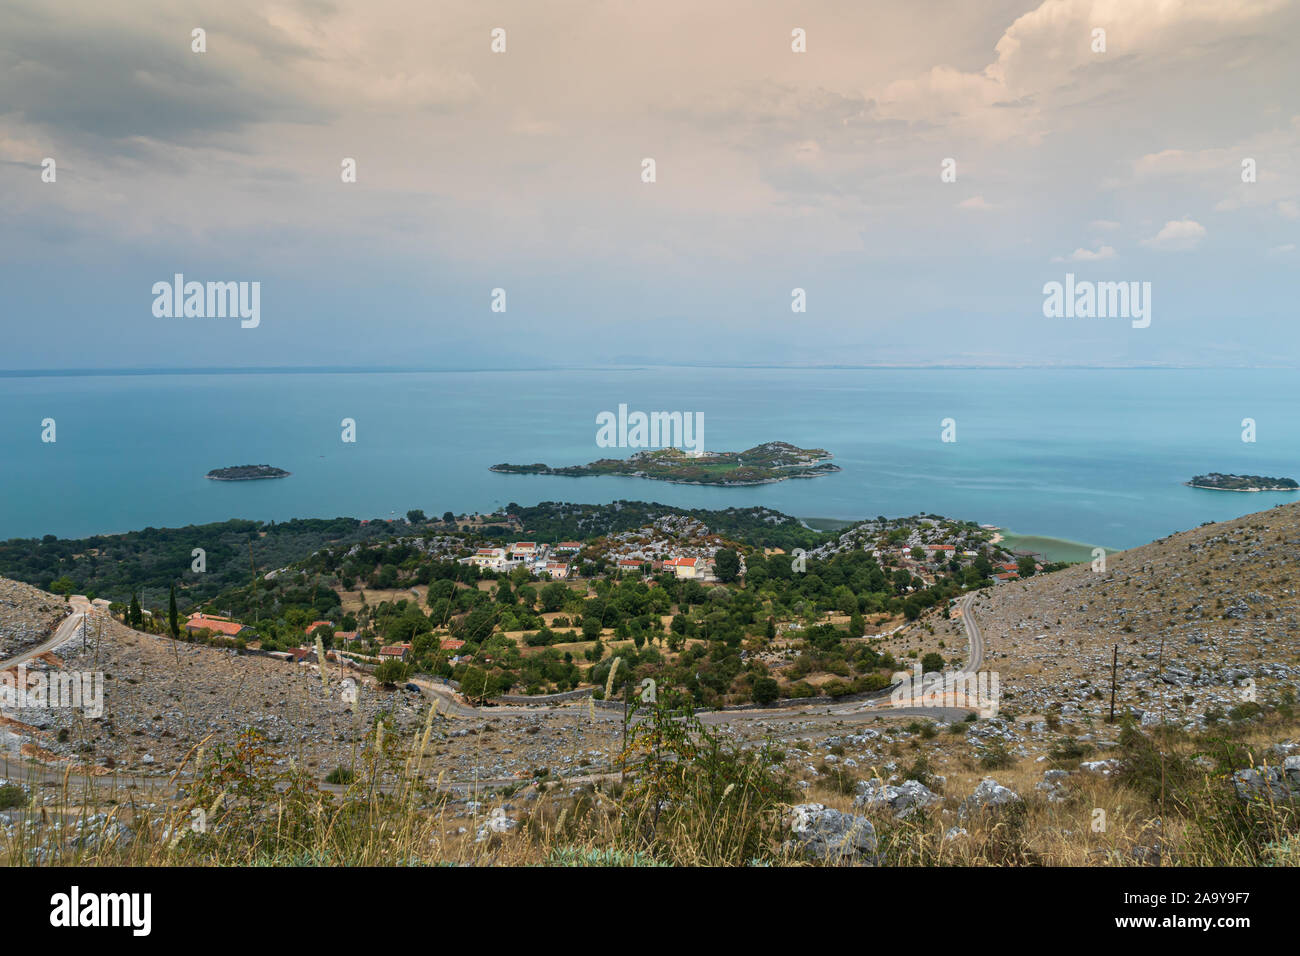 Murichi. Top view from the side of the road. Skadar lake. Montenegro. Stock Photo